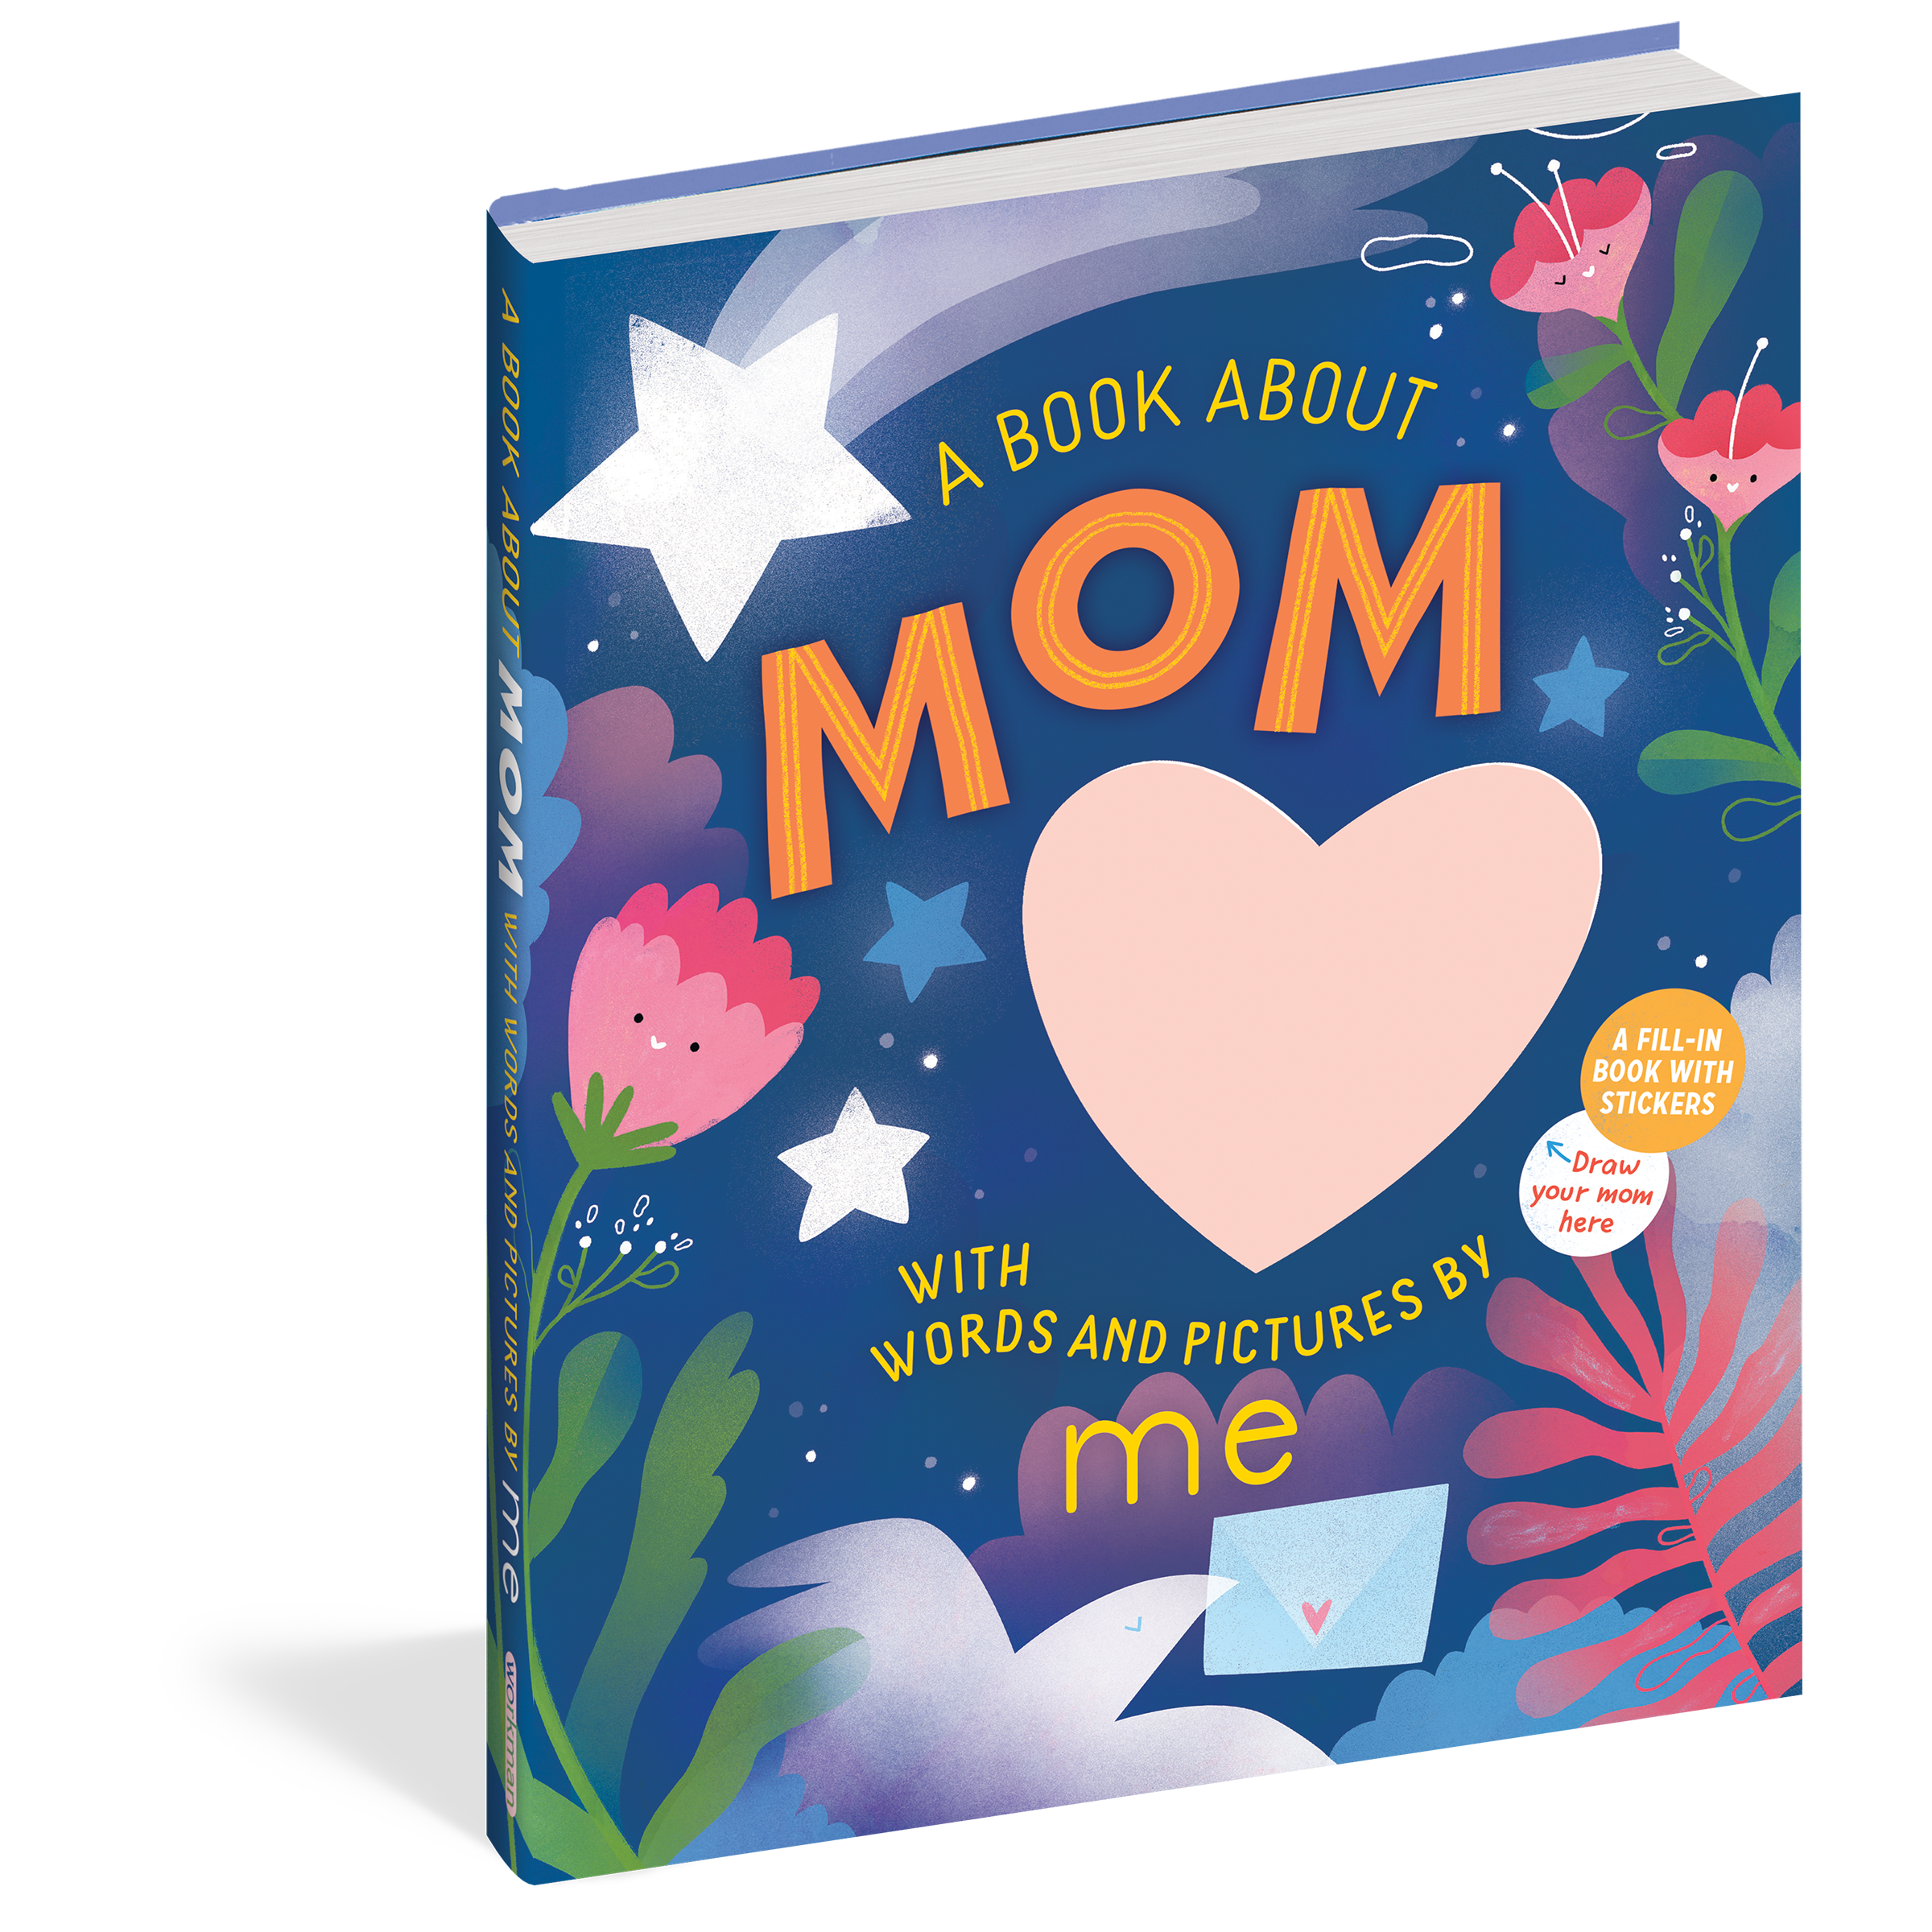 Workman Publishing: A Book about Mom with Words and Pictures by Me-Workman Publishing-Little Giant Kidz